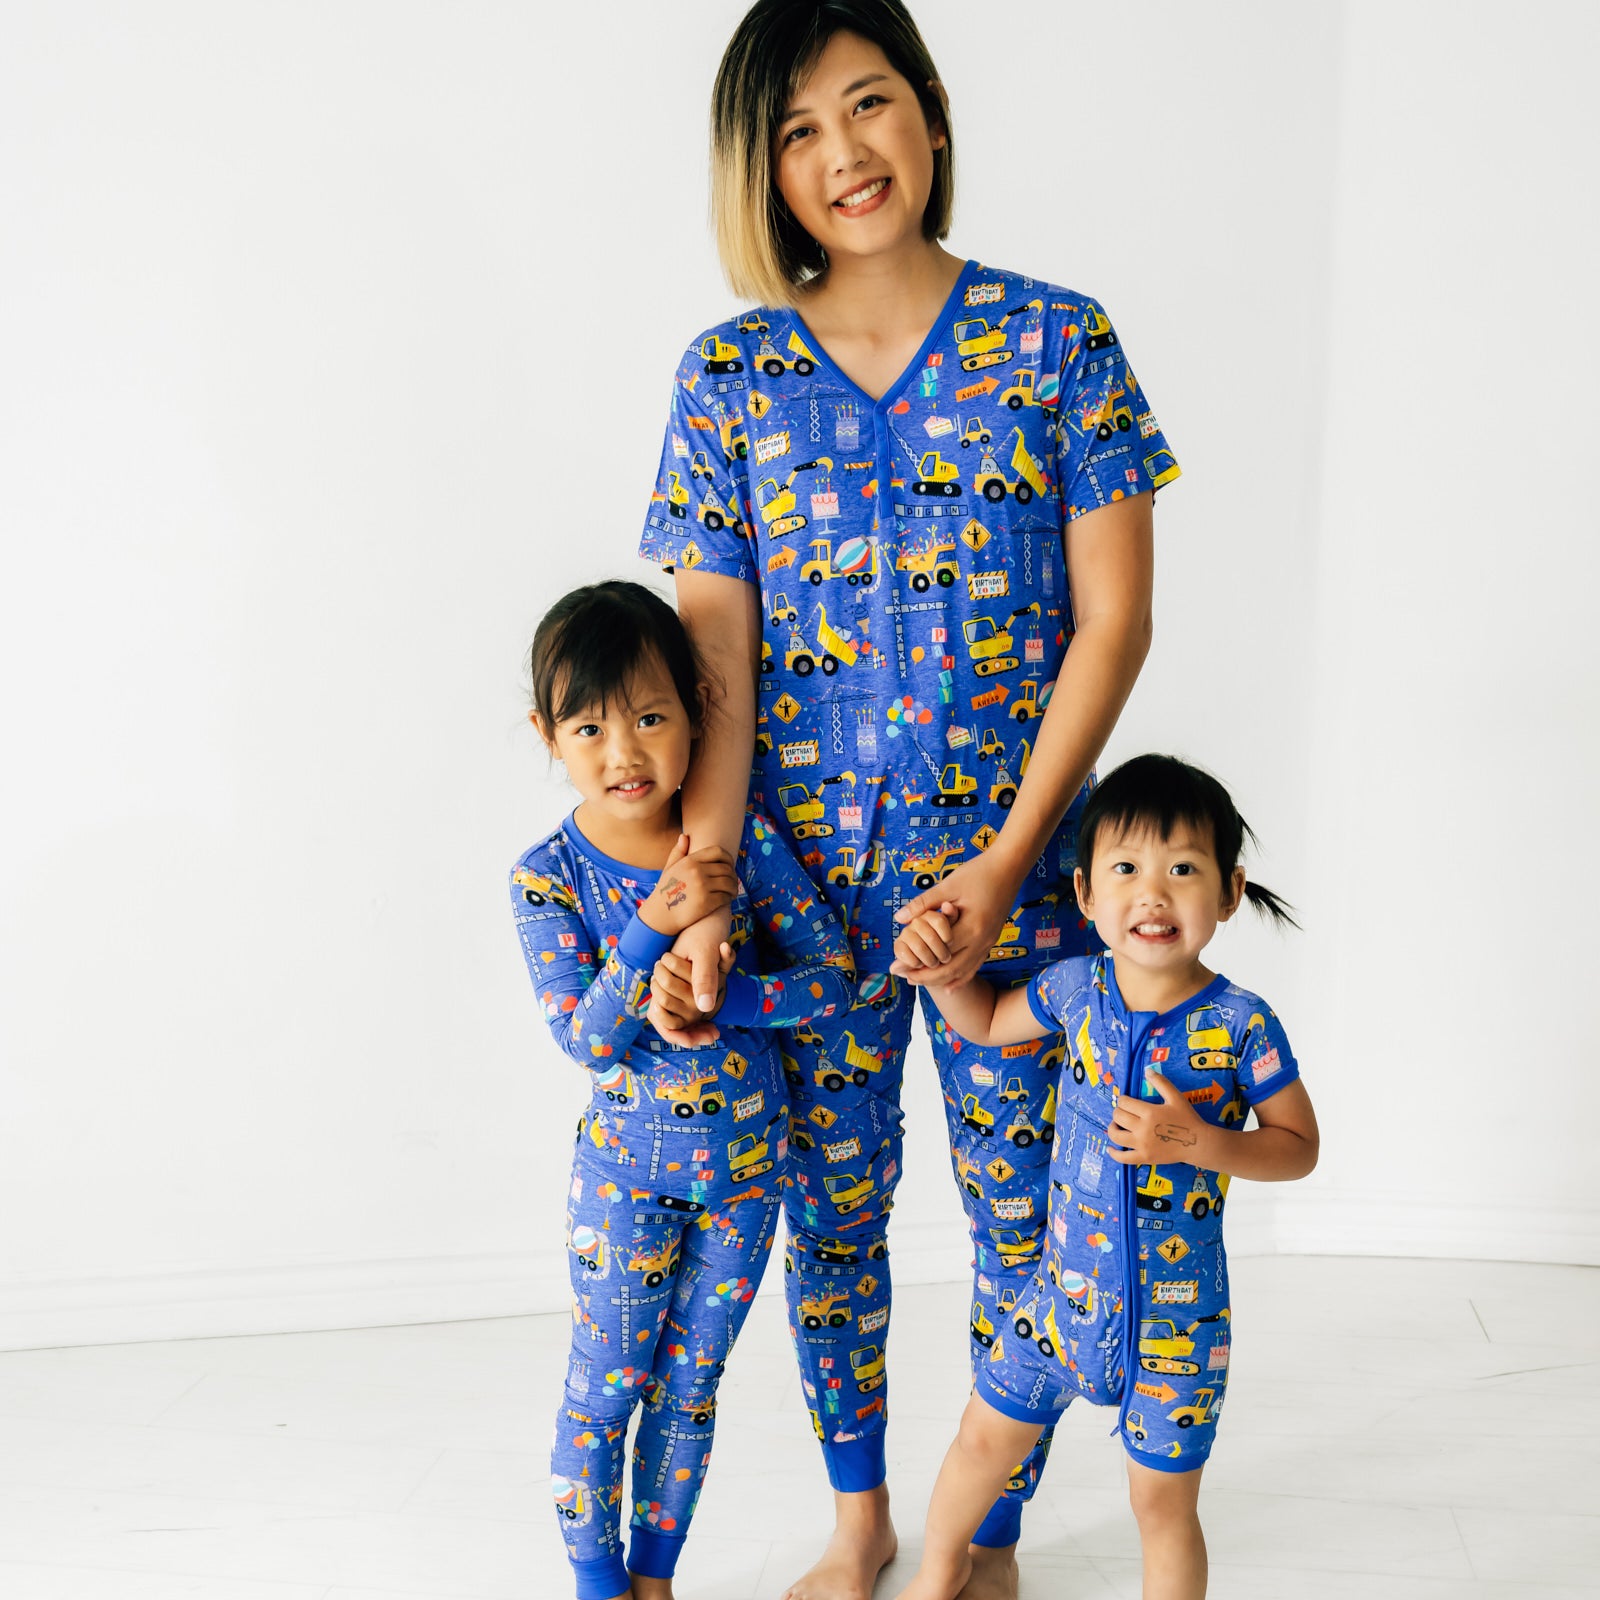 Mom with her two children wearing matching Birthday Builder pajamas. Mom is wearing women's Birthday Builders women's pants paired with a women's top. Children are wearing Birthday Builders pjs in two piece and zippy styles.